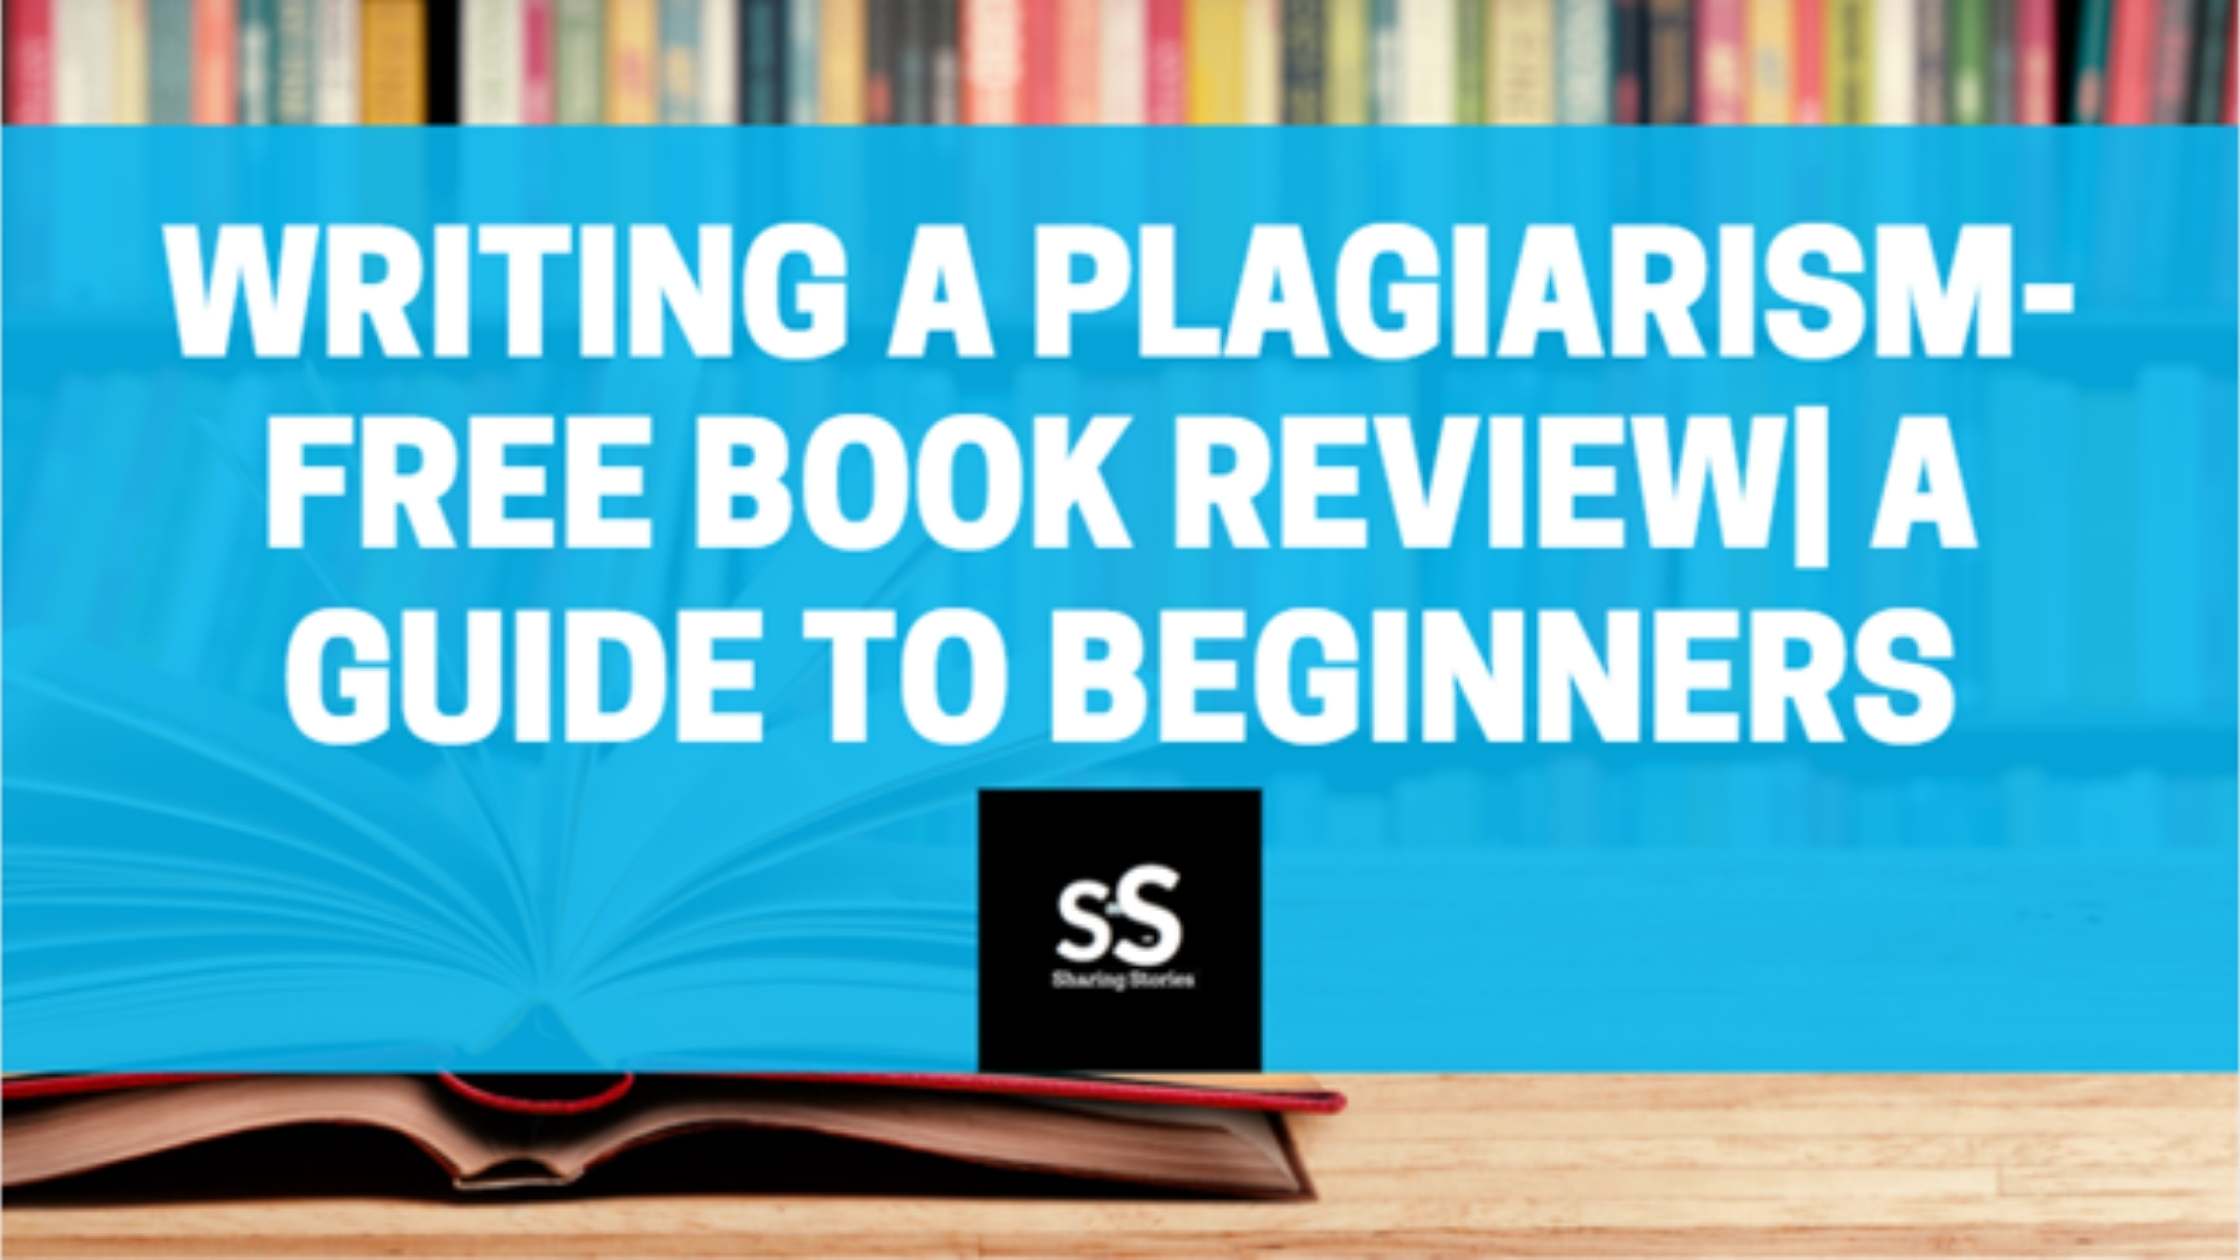 Writing A Plagiarism-Free Book Review| A Guide to Beginners